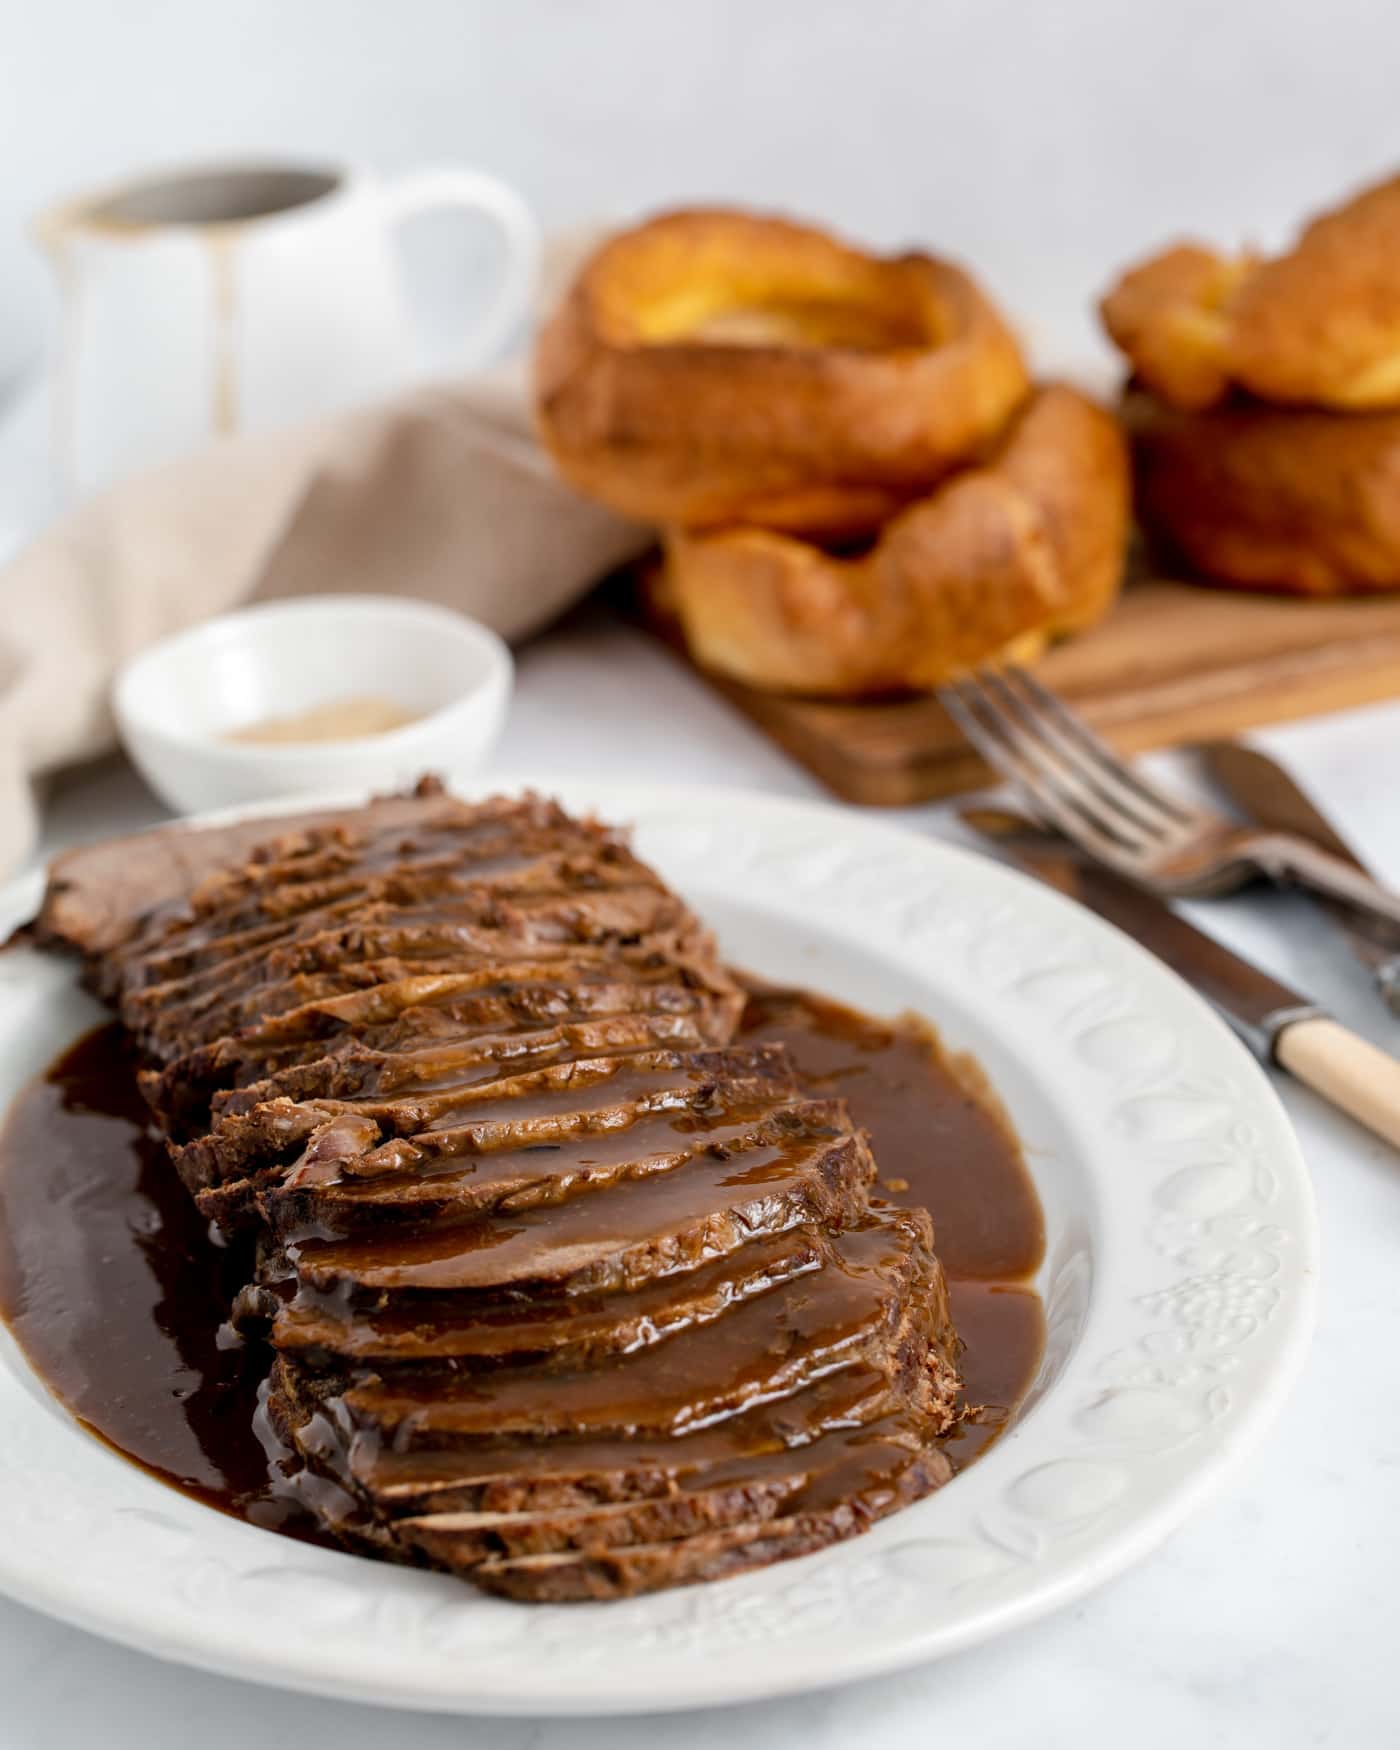 sliced roast beef on a white serving platter with knives and forks to the side and yorkshire puddings are in the background on one side and a white jug of gray on the other